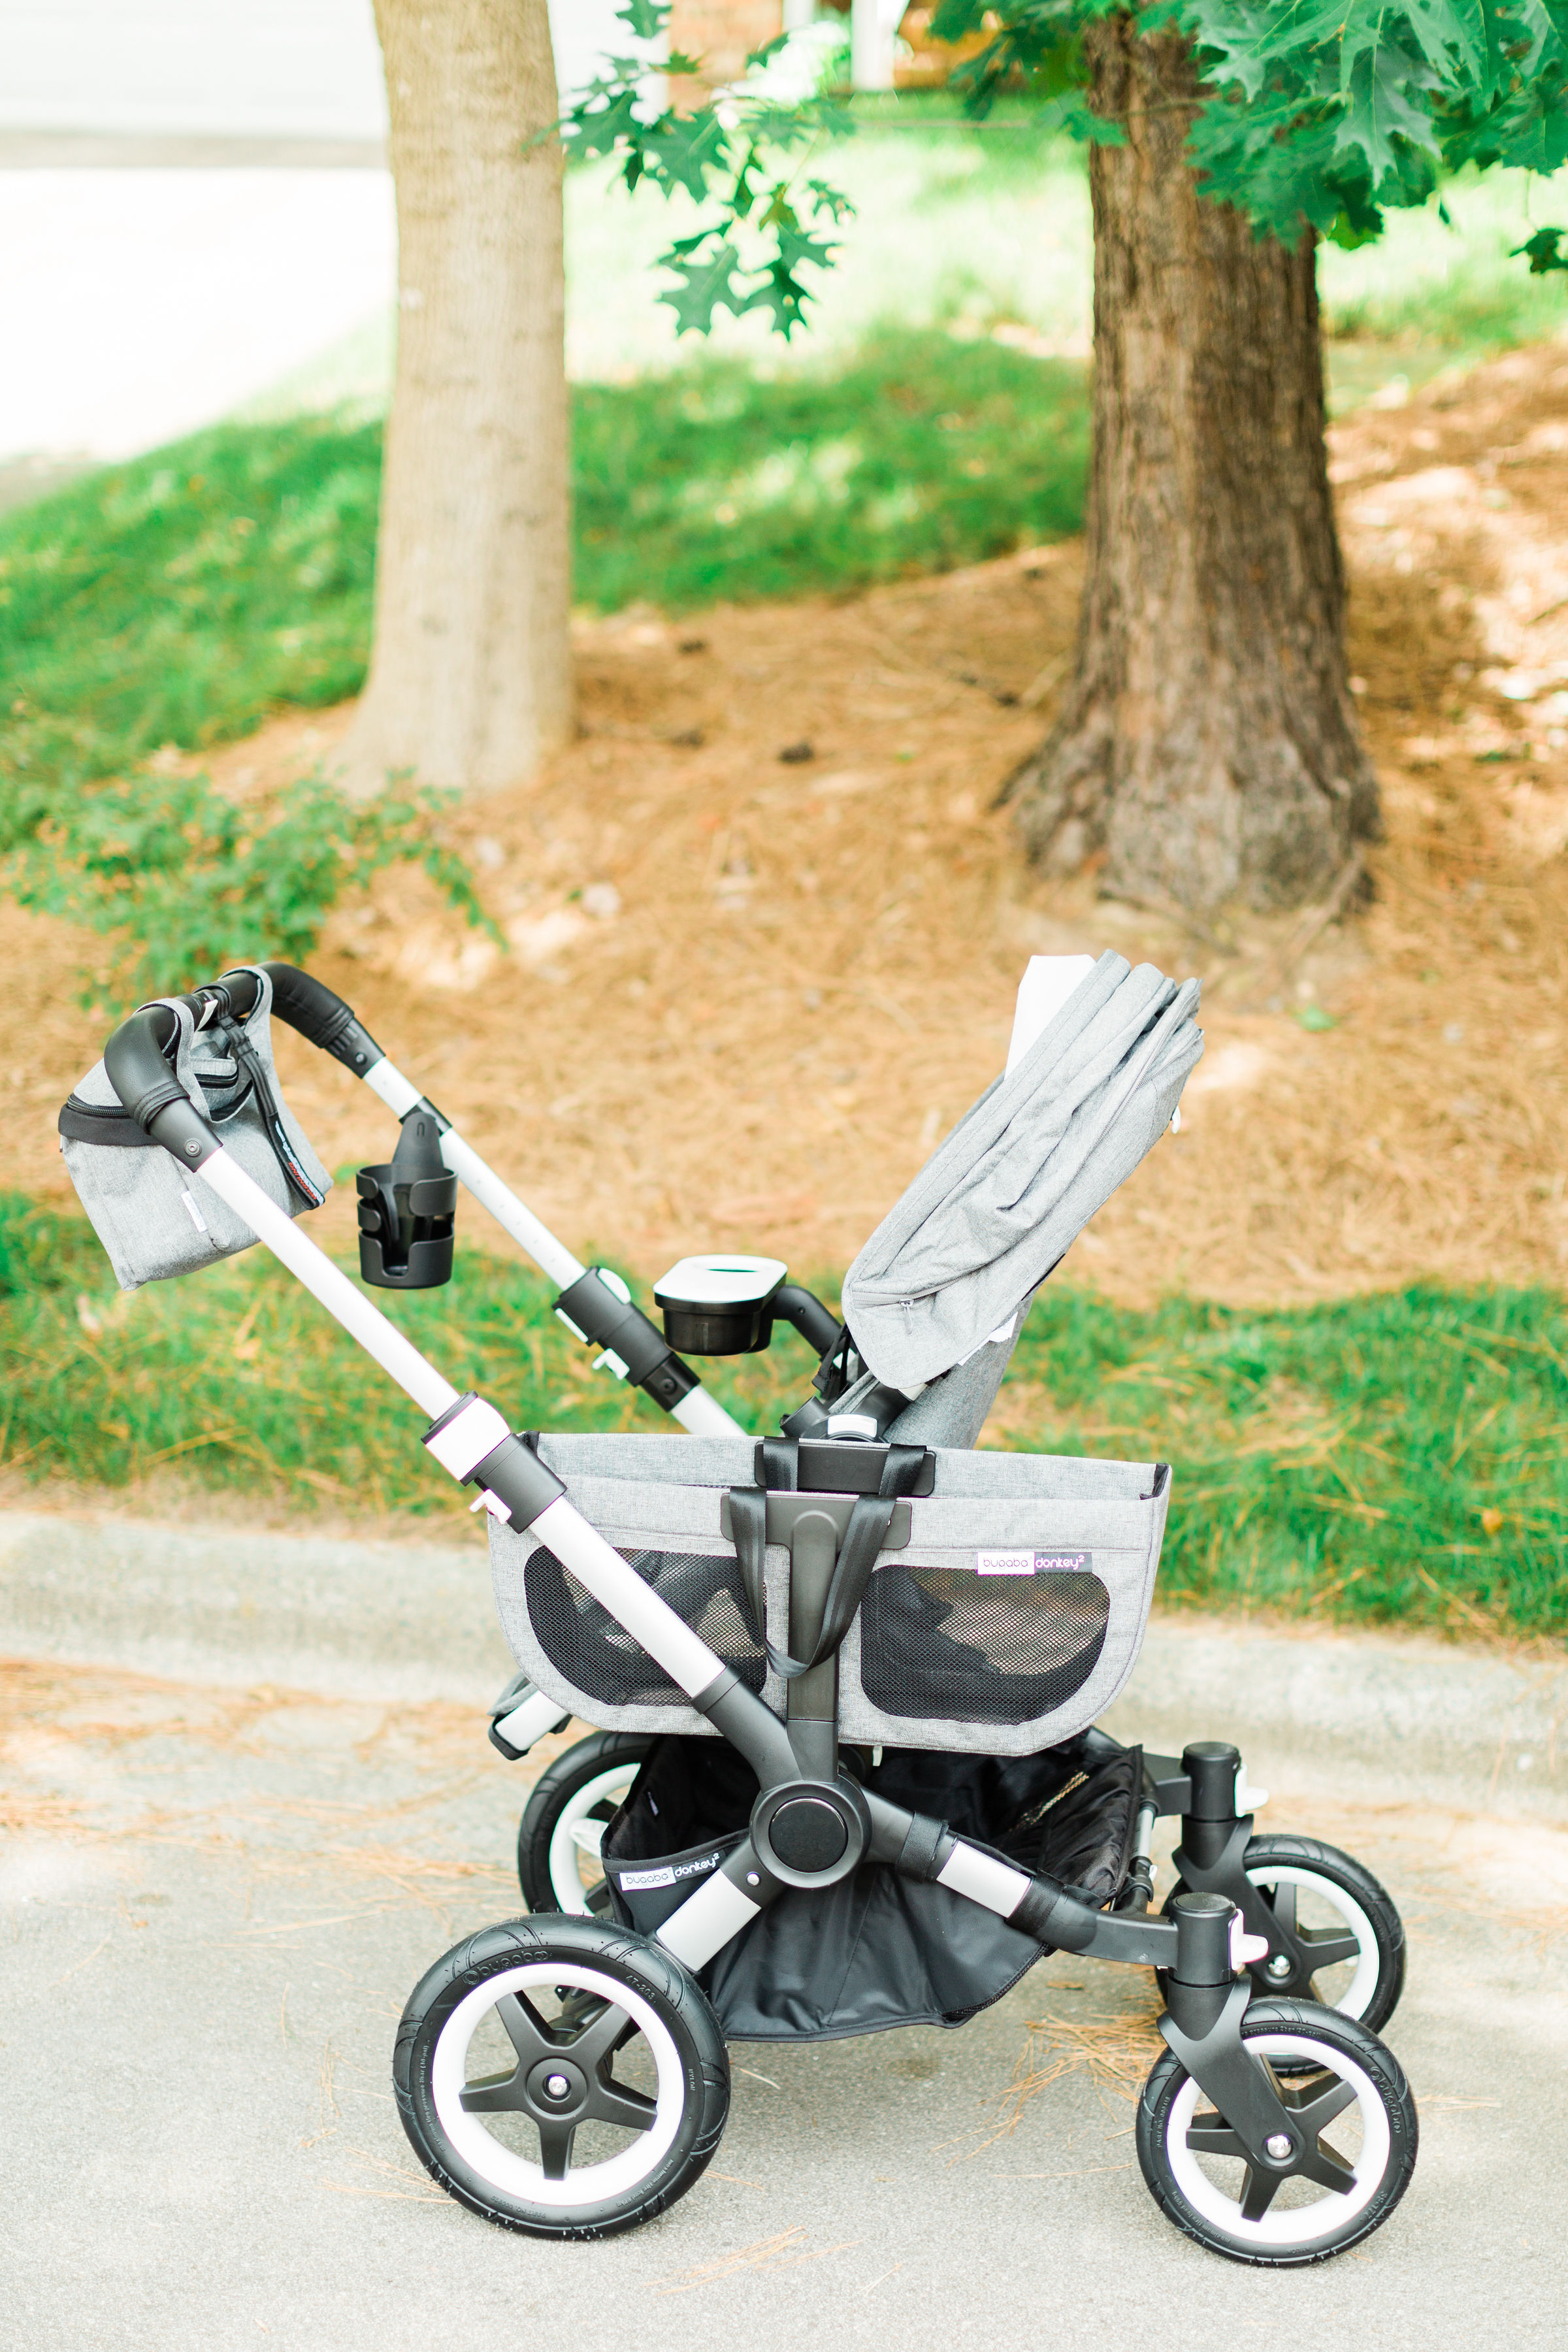 A detailed look at the all new 2019 Bugaboo Donkey2 + that can now accommodate 50 pounds per seat, plus a review of the stroller in Mono and Duo mode with the Comfort Wheeled Board plus our favorite accessories. | glitterinc.com | @glitterinc